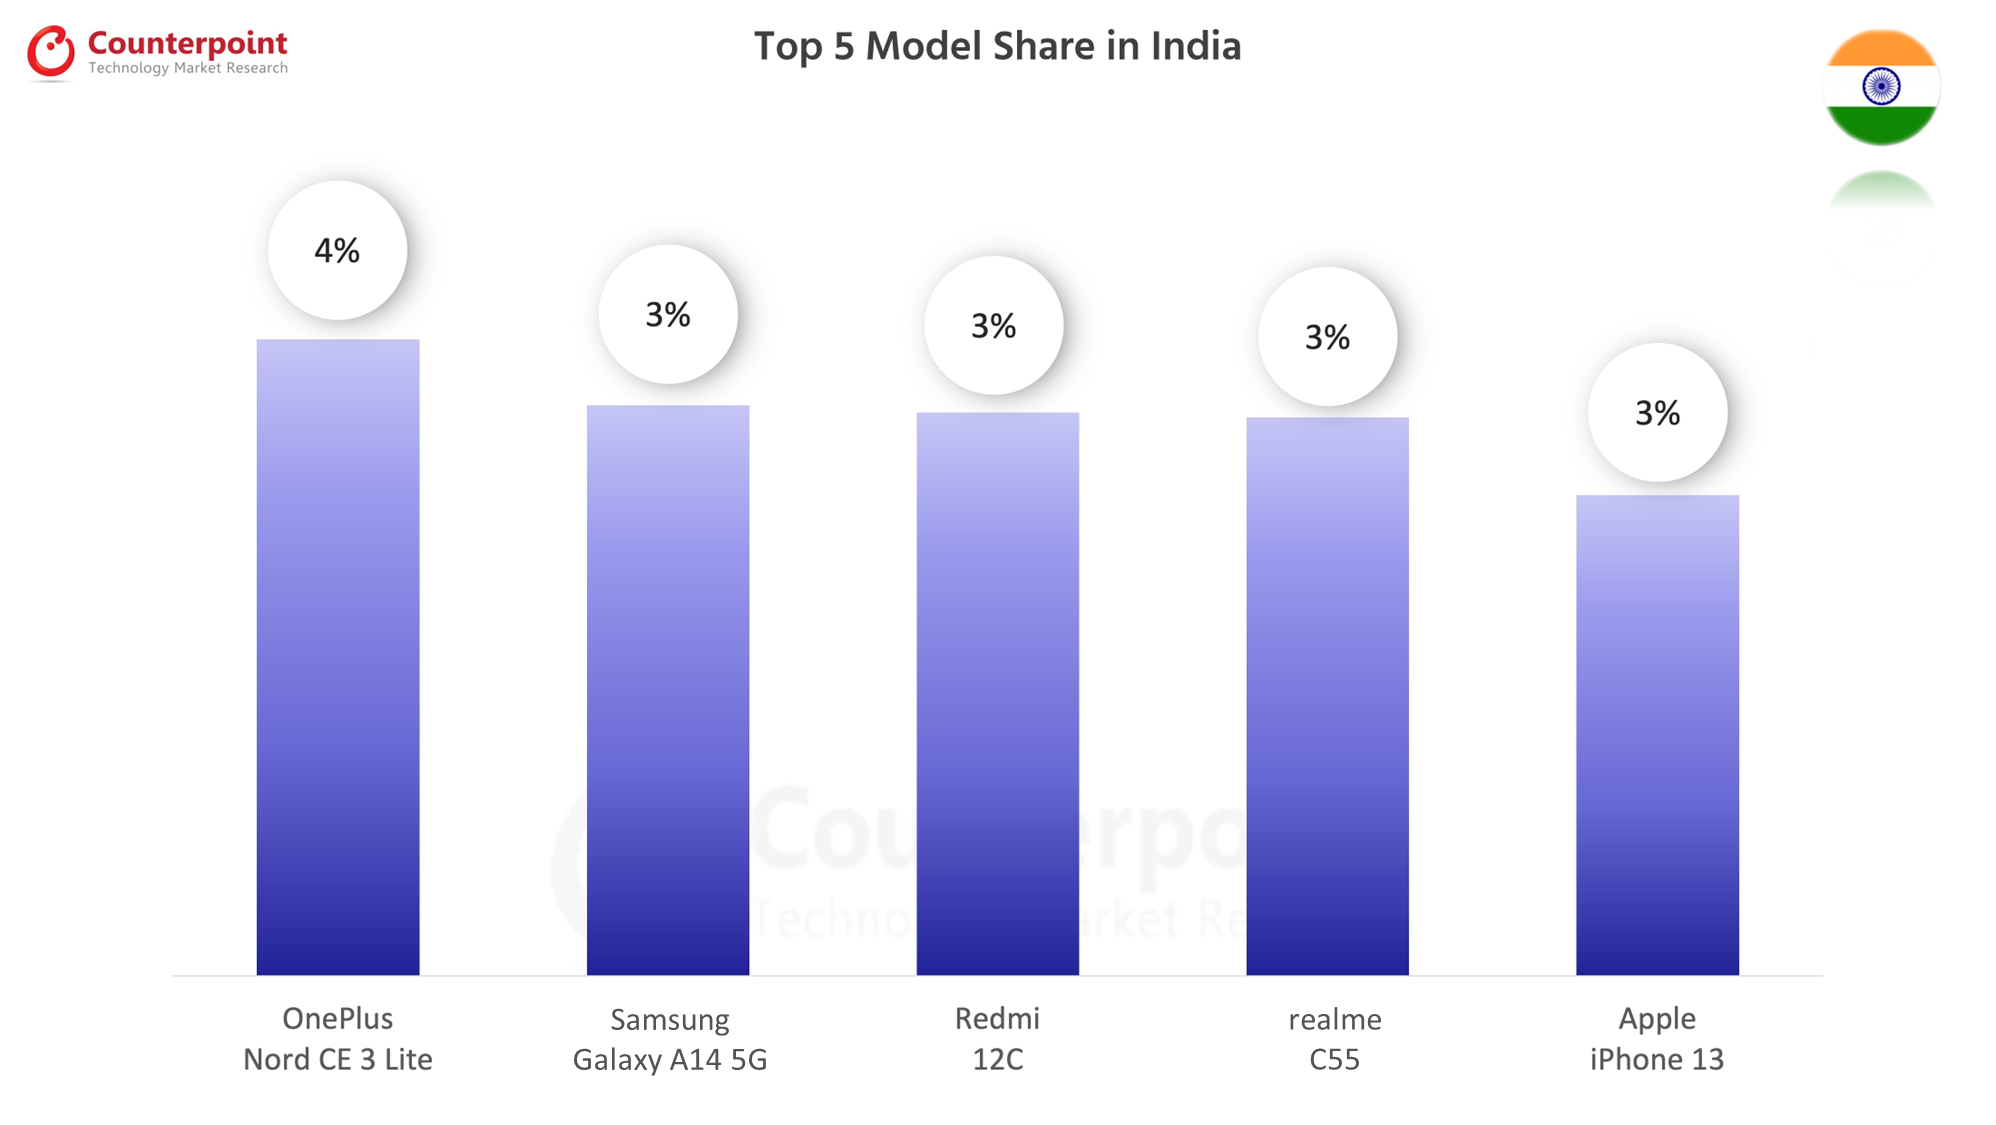 Top 5 Smartphone Model Share in India